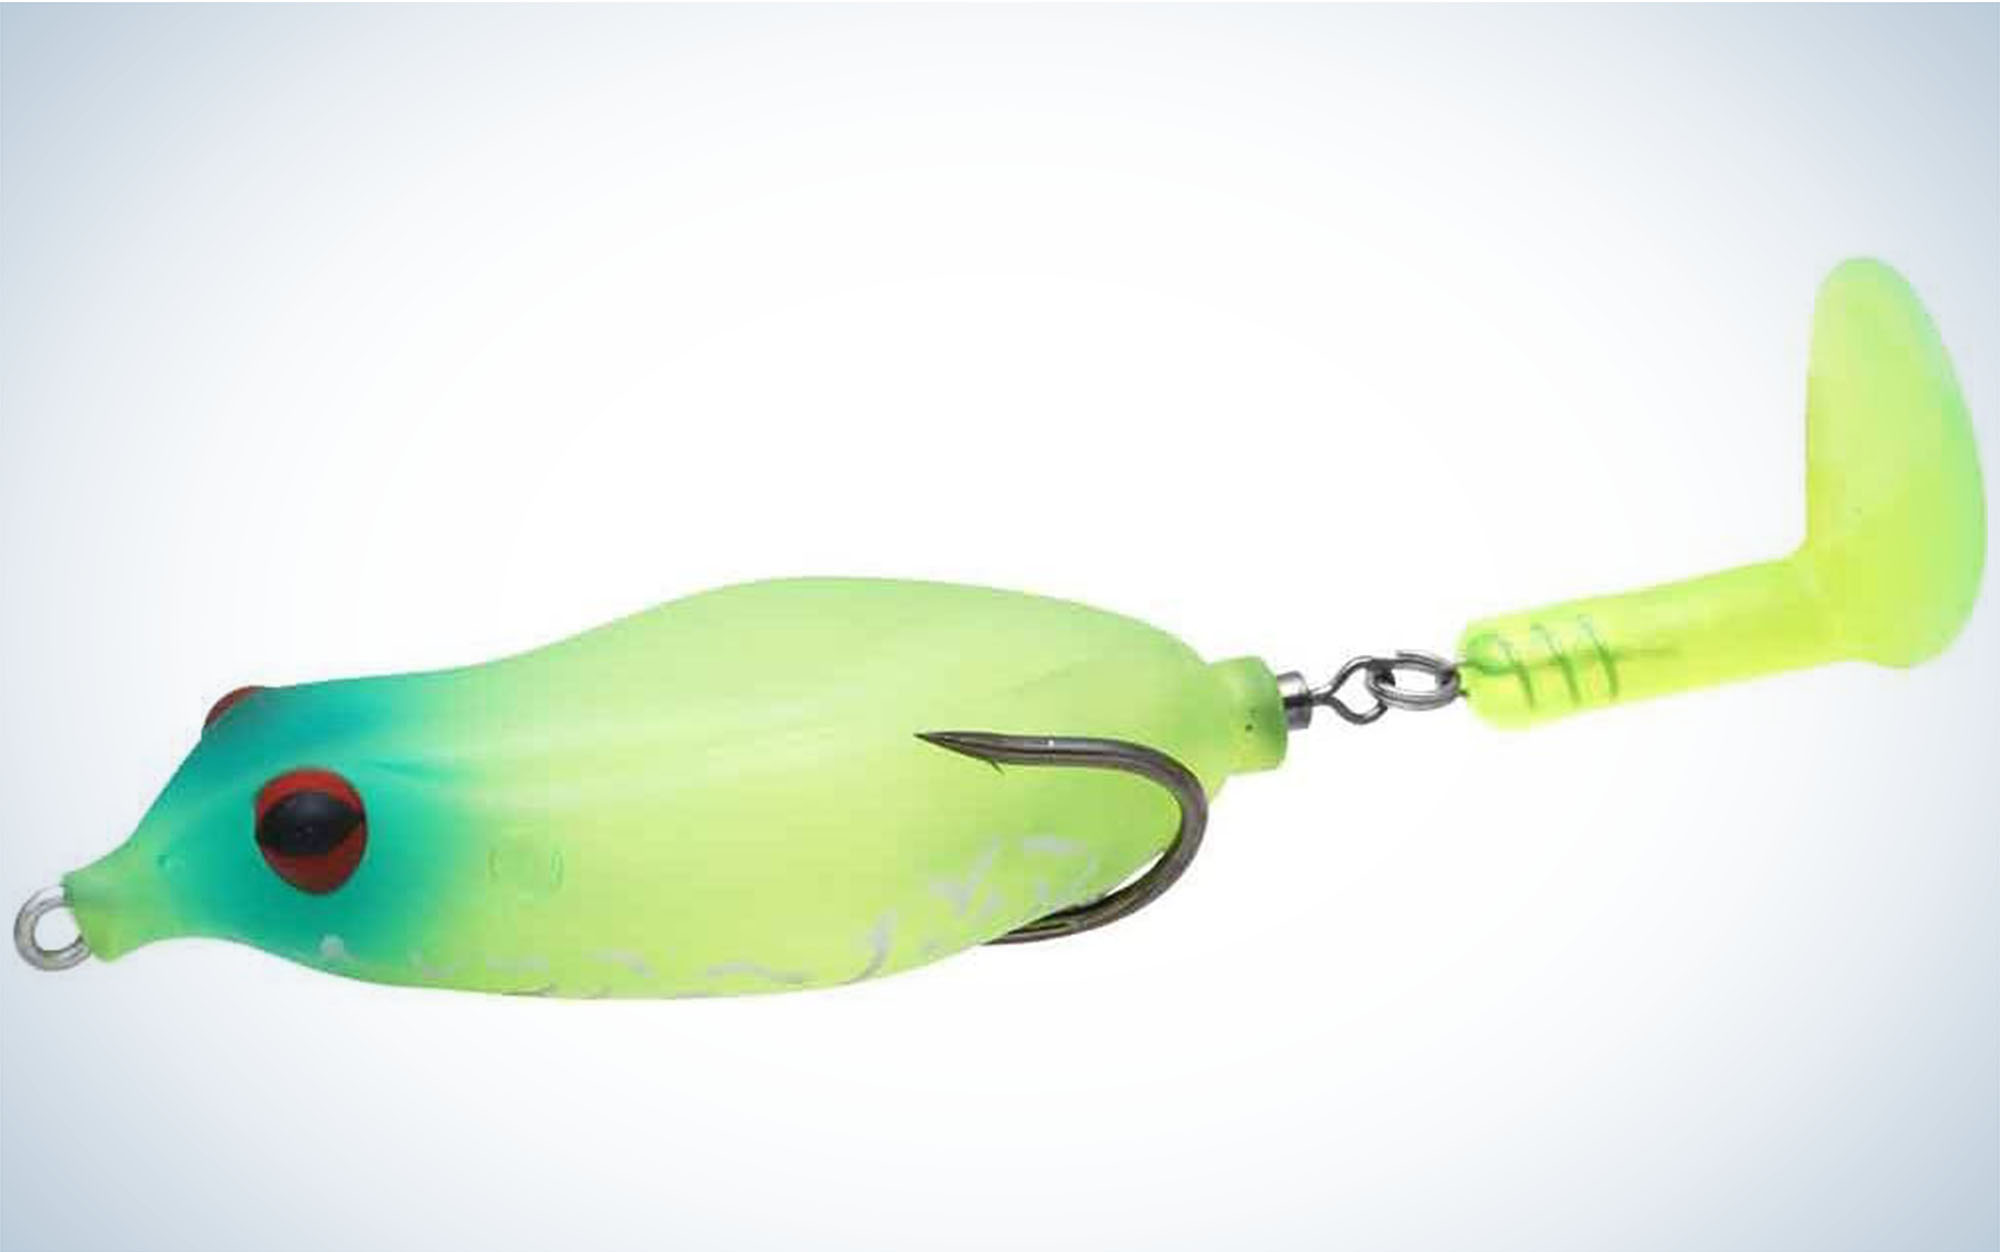 ChaseBaits Introduces Three of Their Lures at Icast 2019 